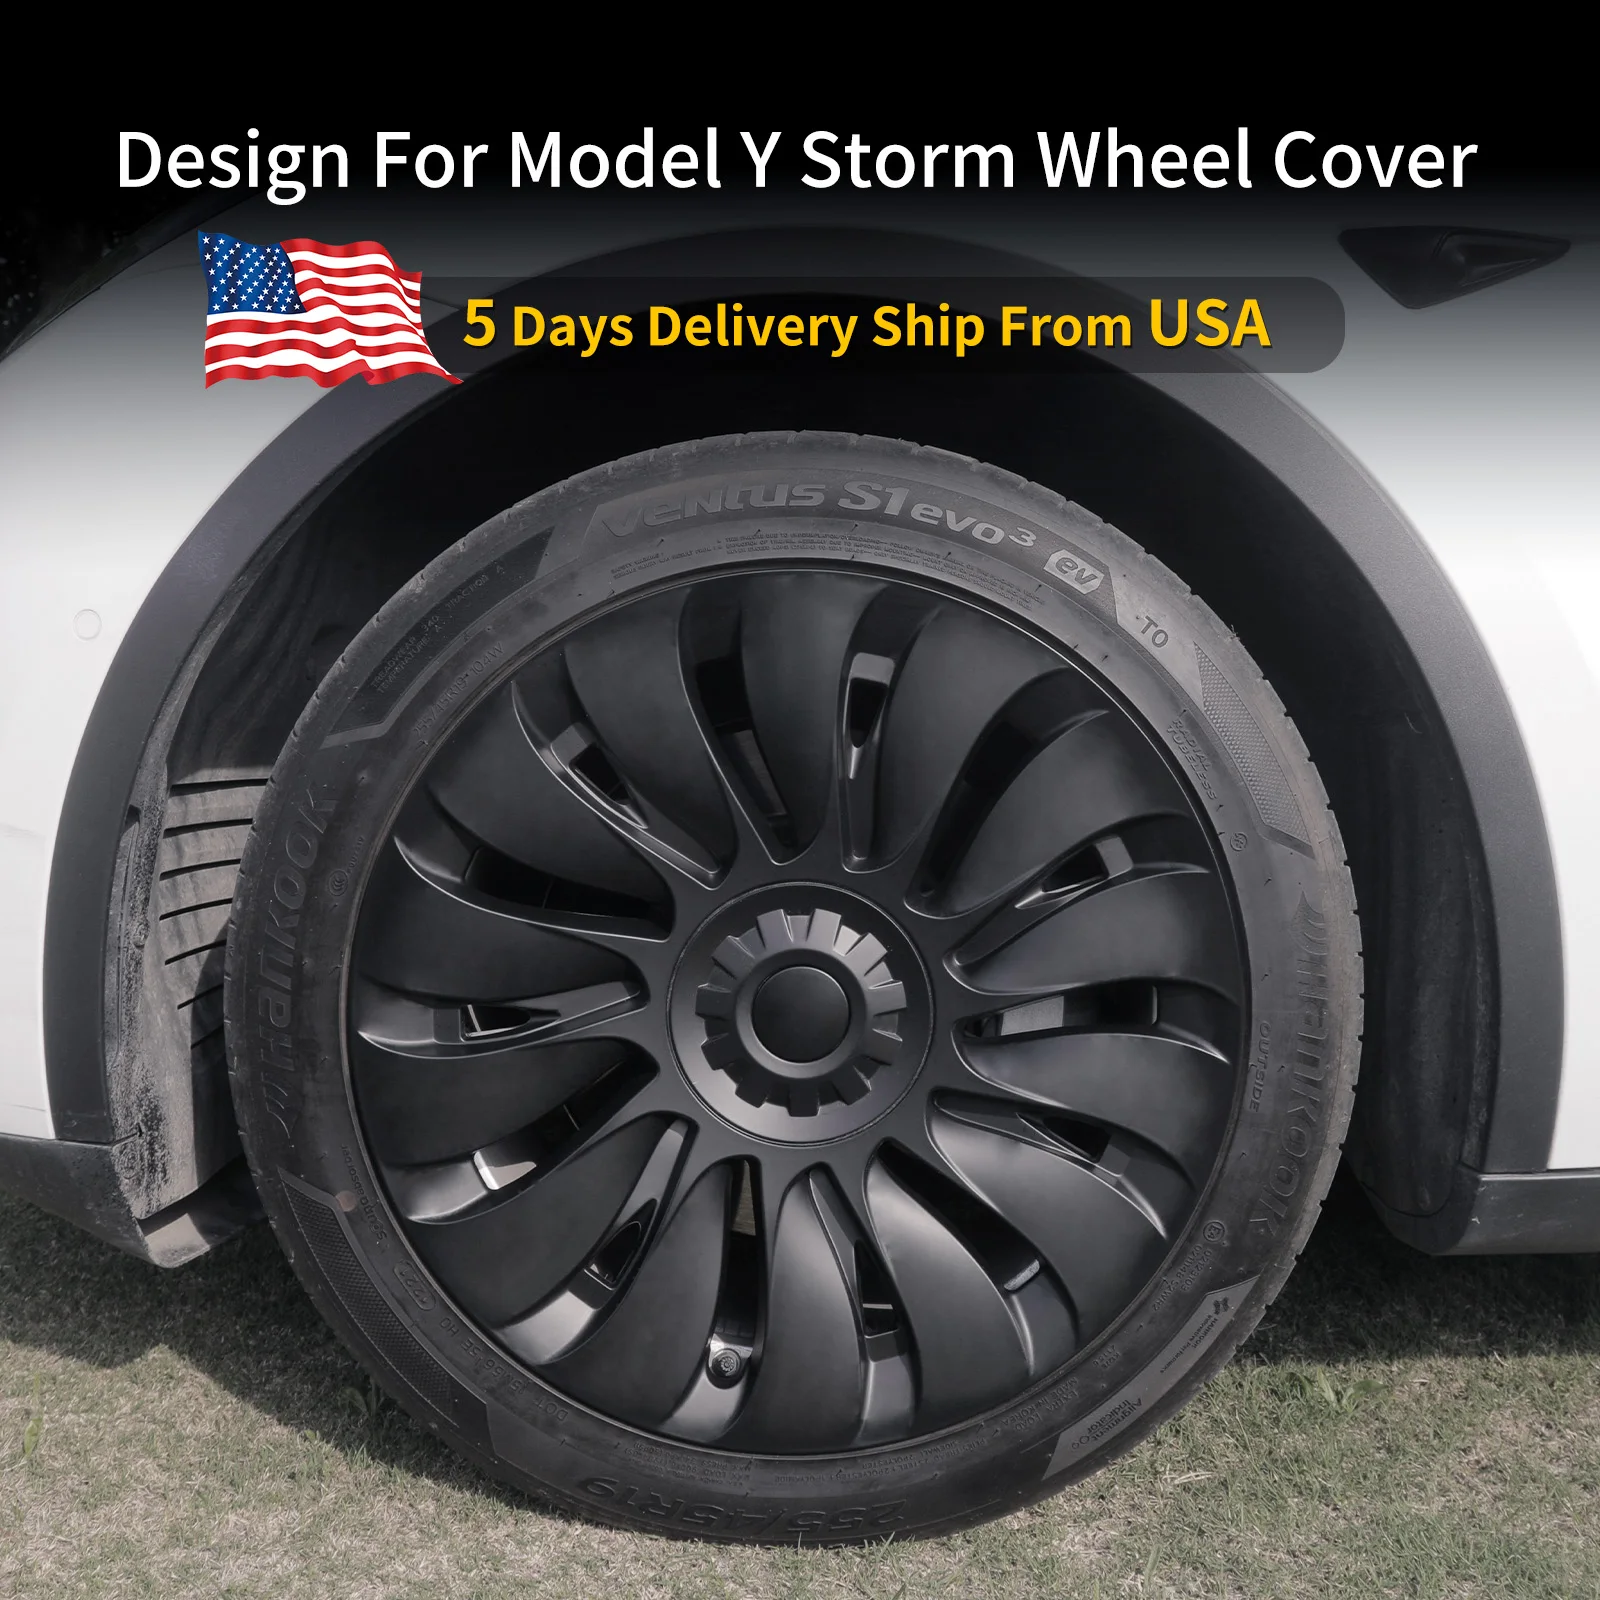 4PCS/Set 19inch Storm Style Hubcap Design for Tesla Model Y Wheel Rim Cover Full Cover Wheel Hubcap Replacement Accessories